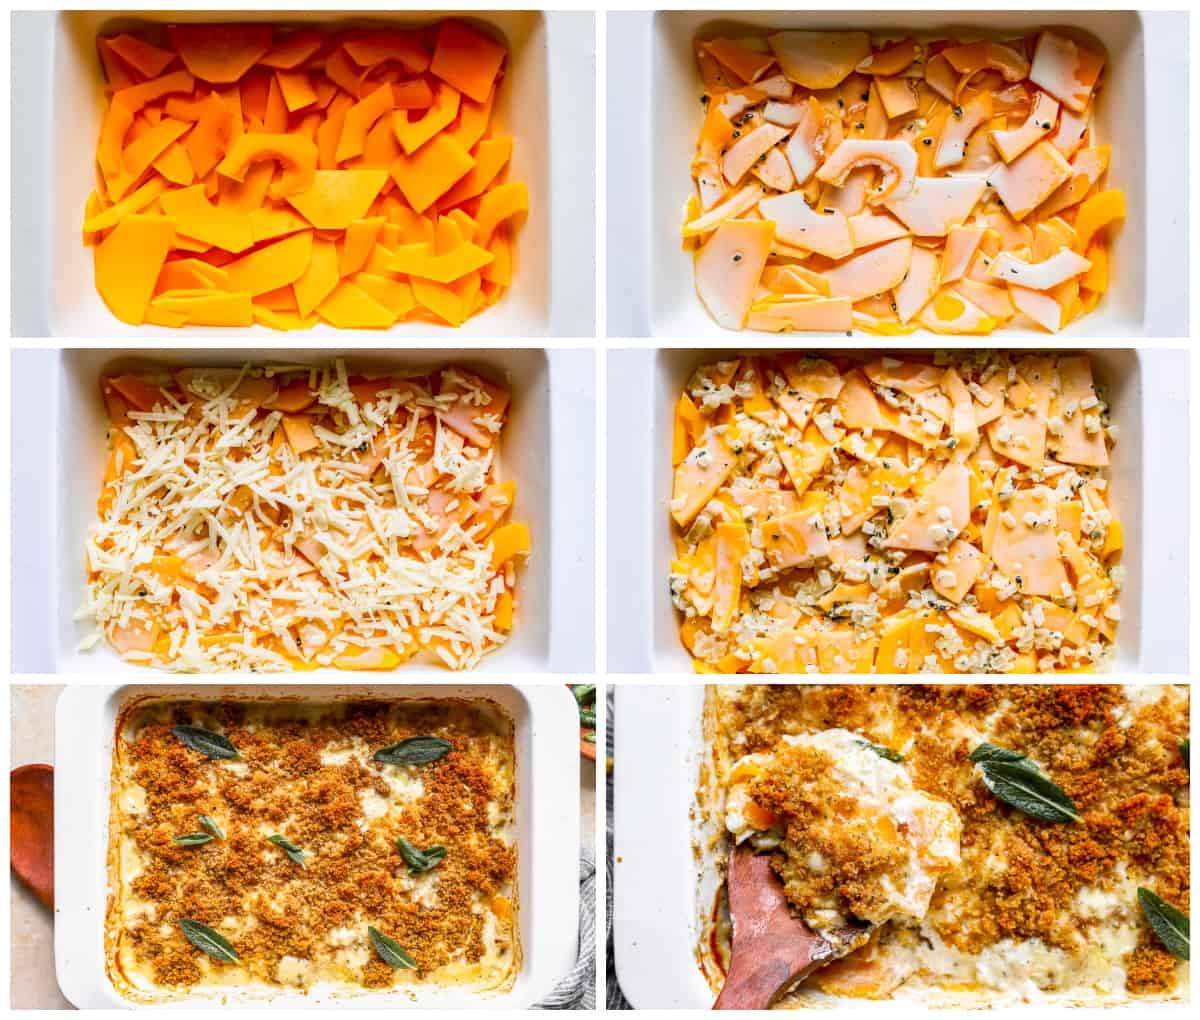 A series of photos showing how to make a butternut squash casserole.